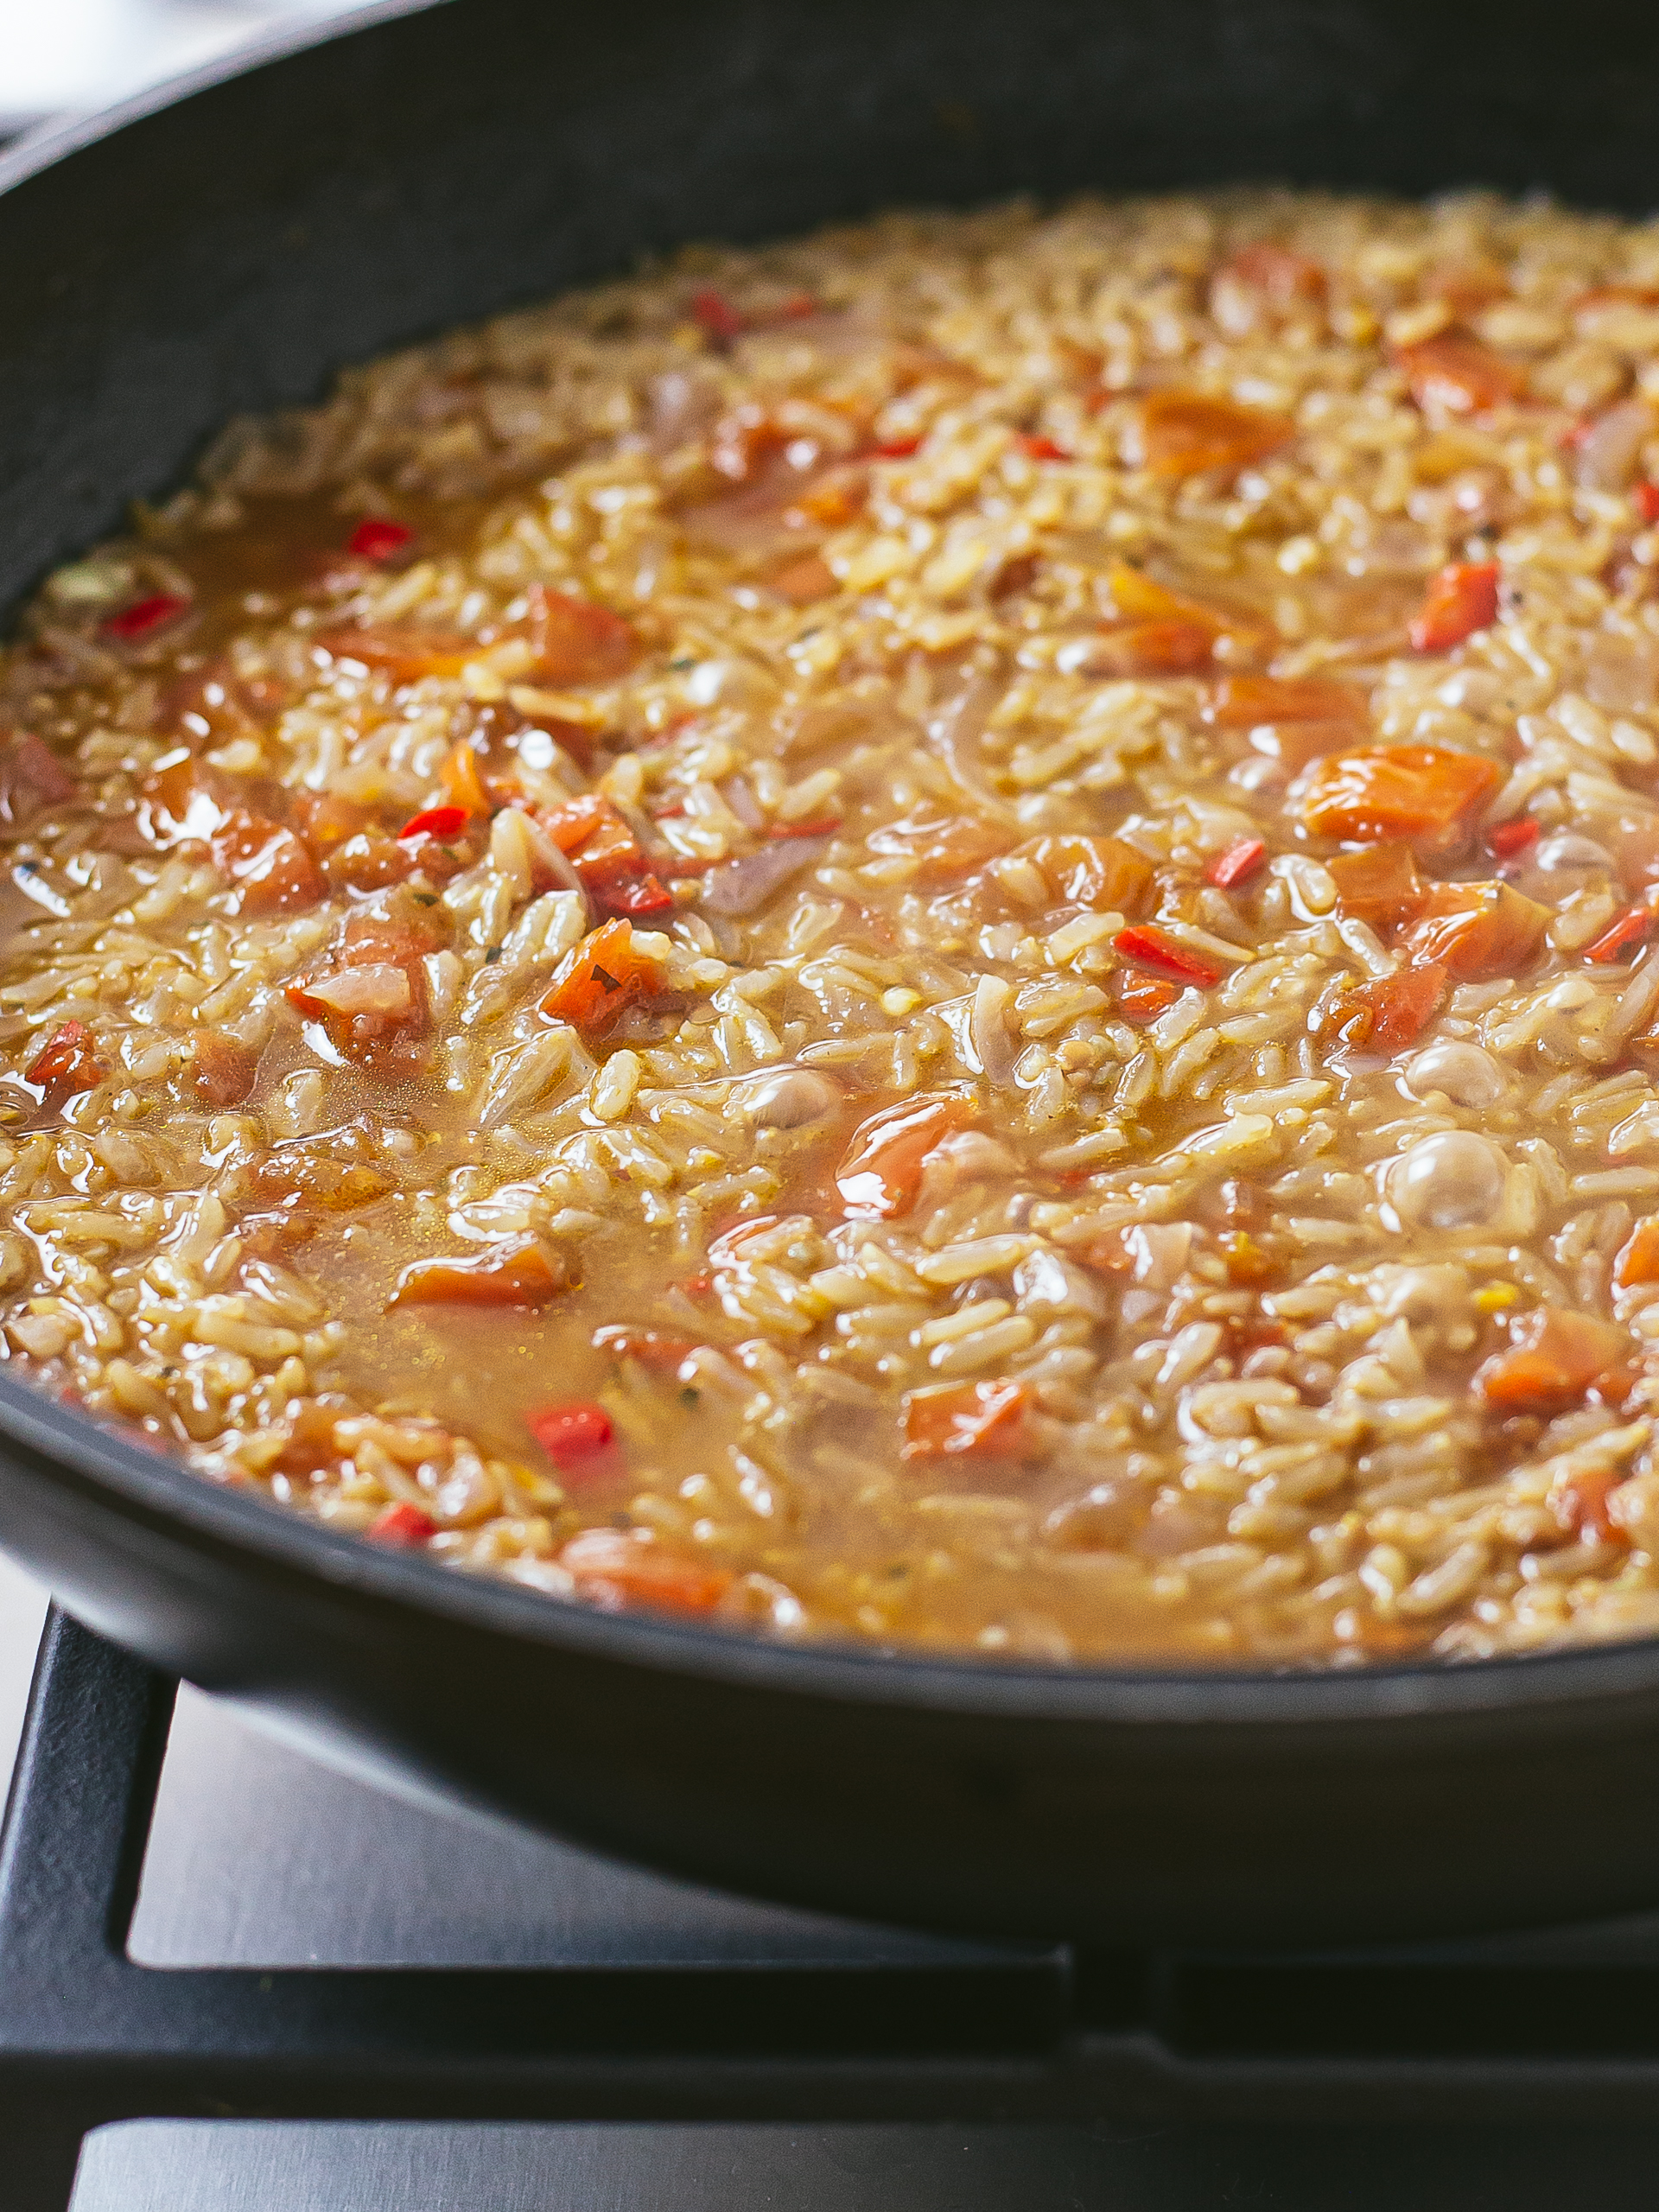 kenyan pilau rice cooking in a pan with tomatoes, chillies, and spices